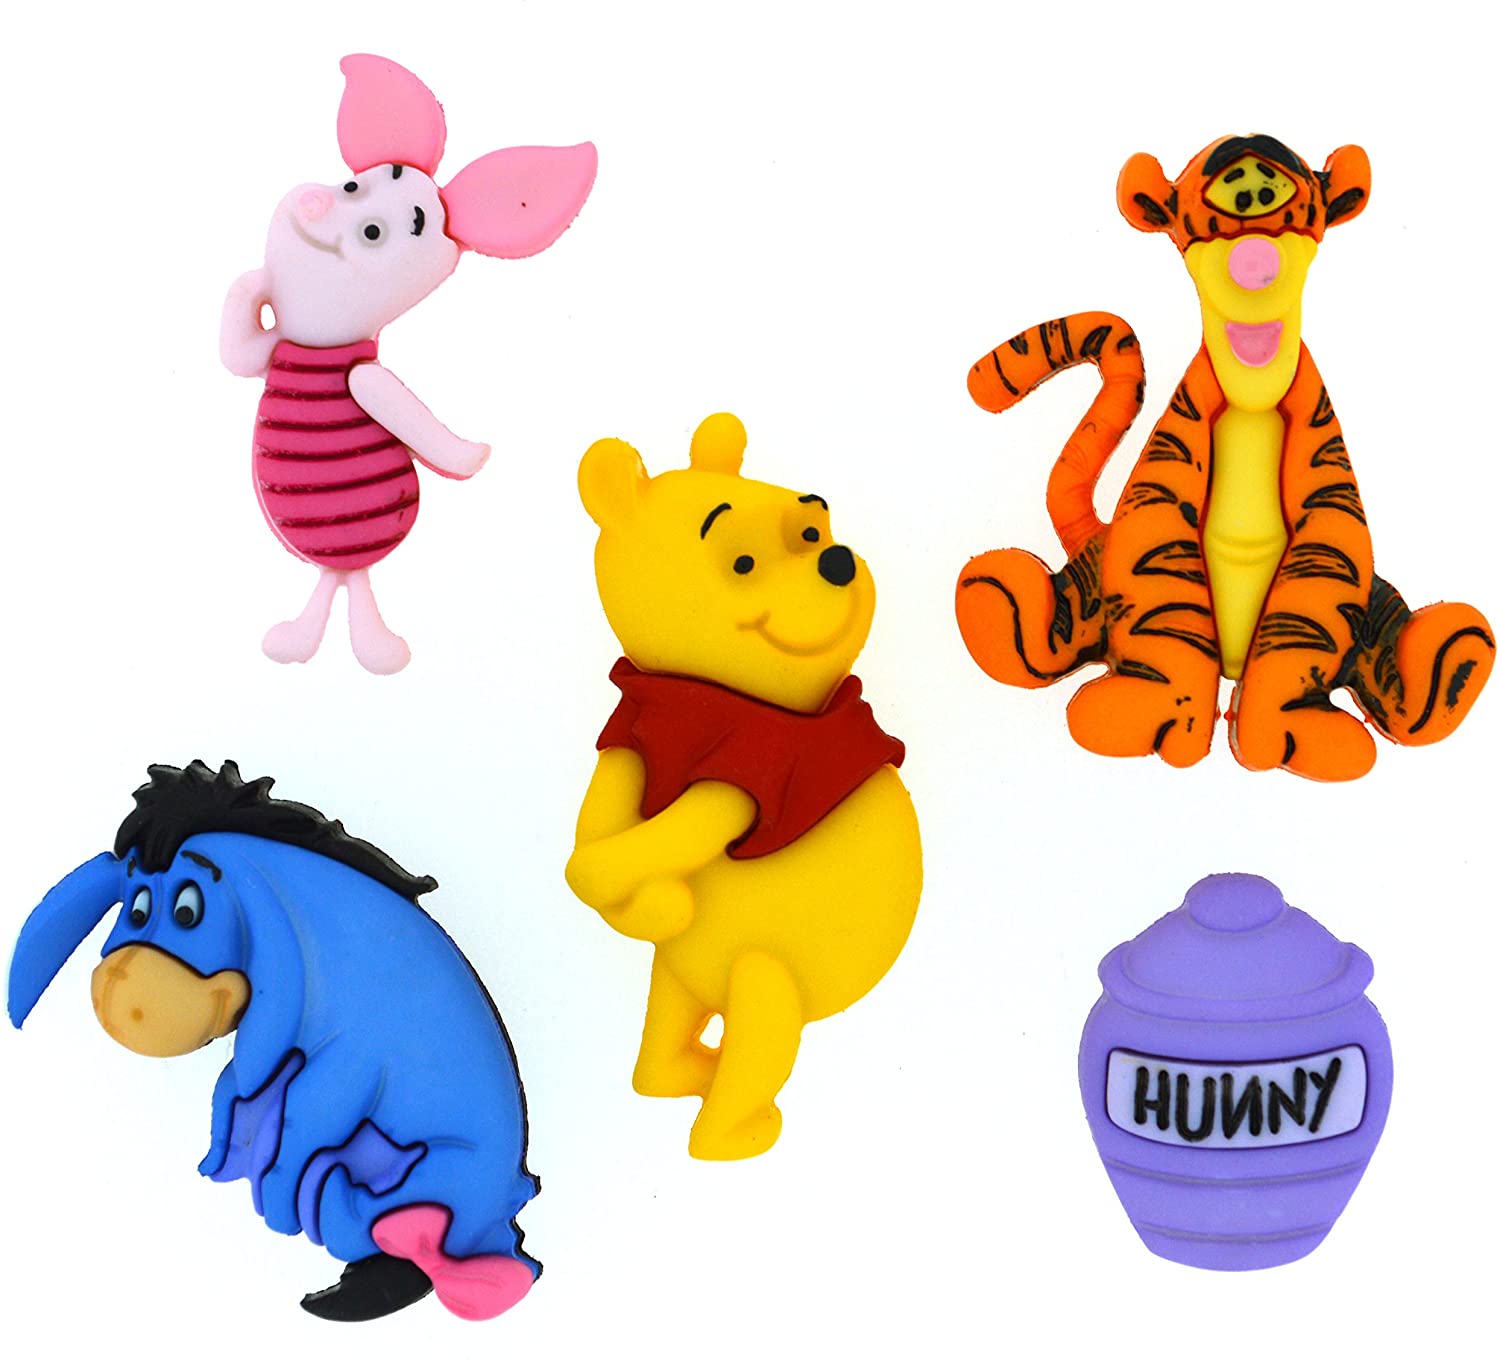 Winnie the Pooh Buttons